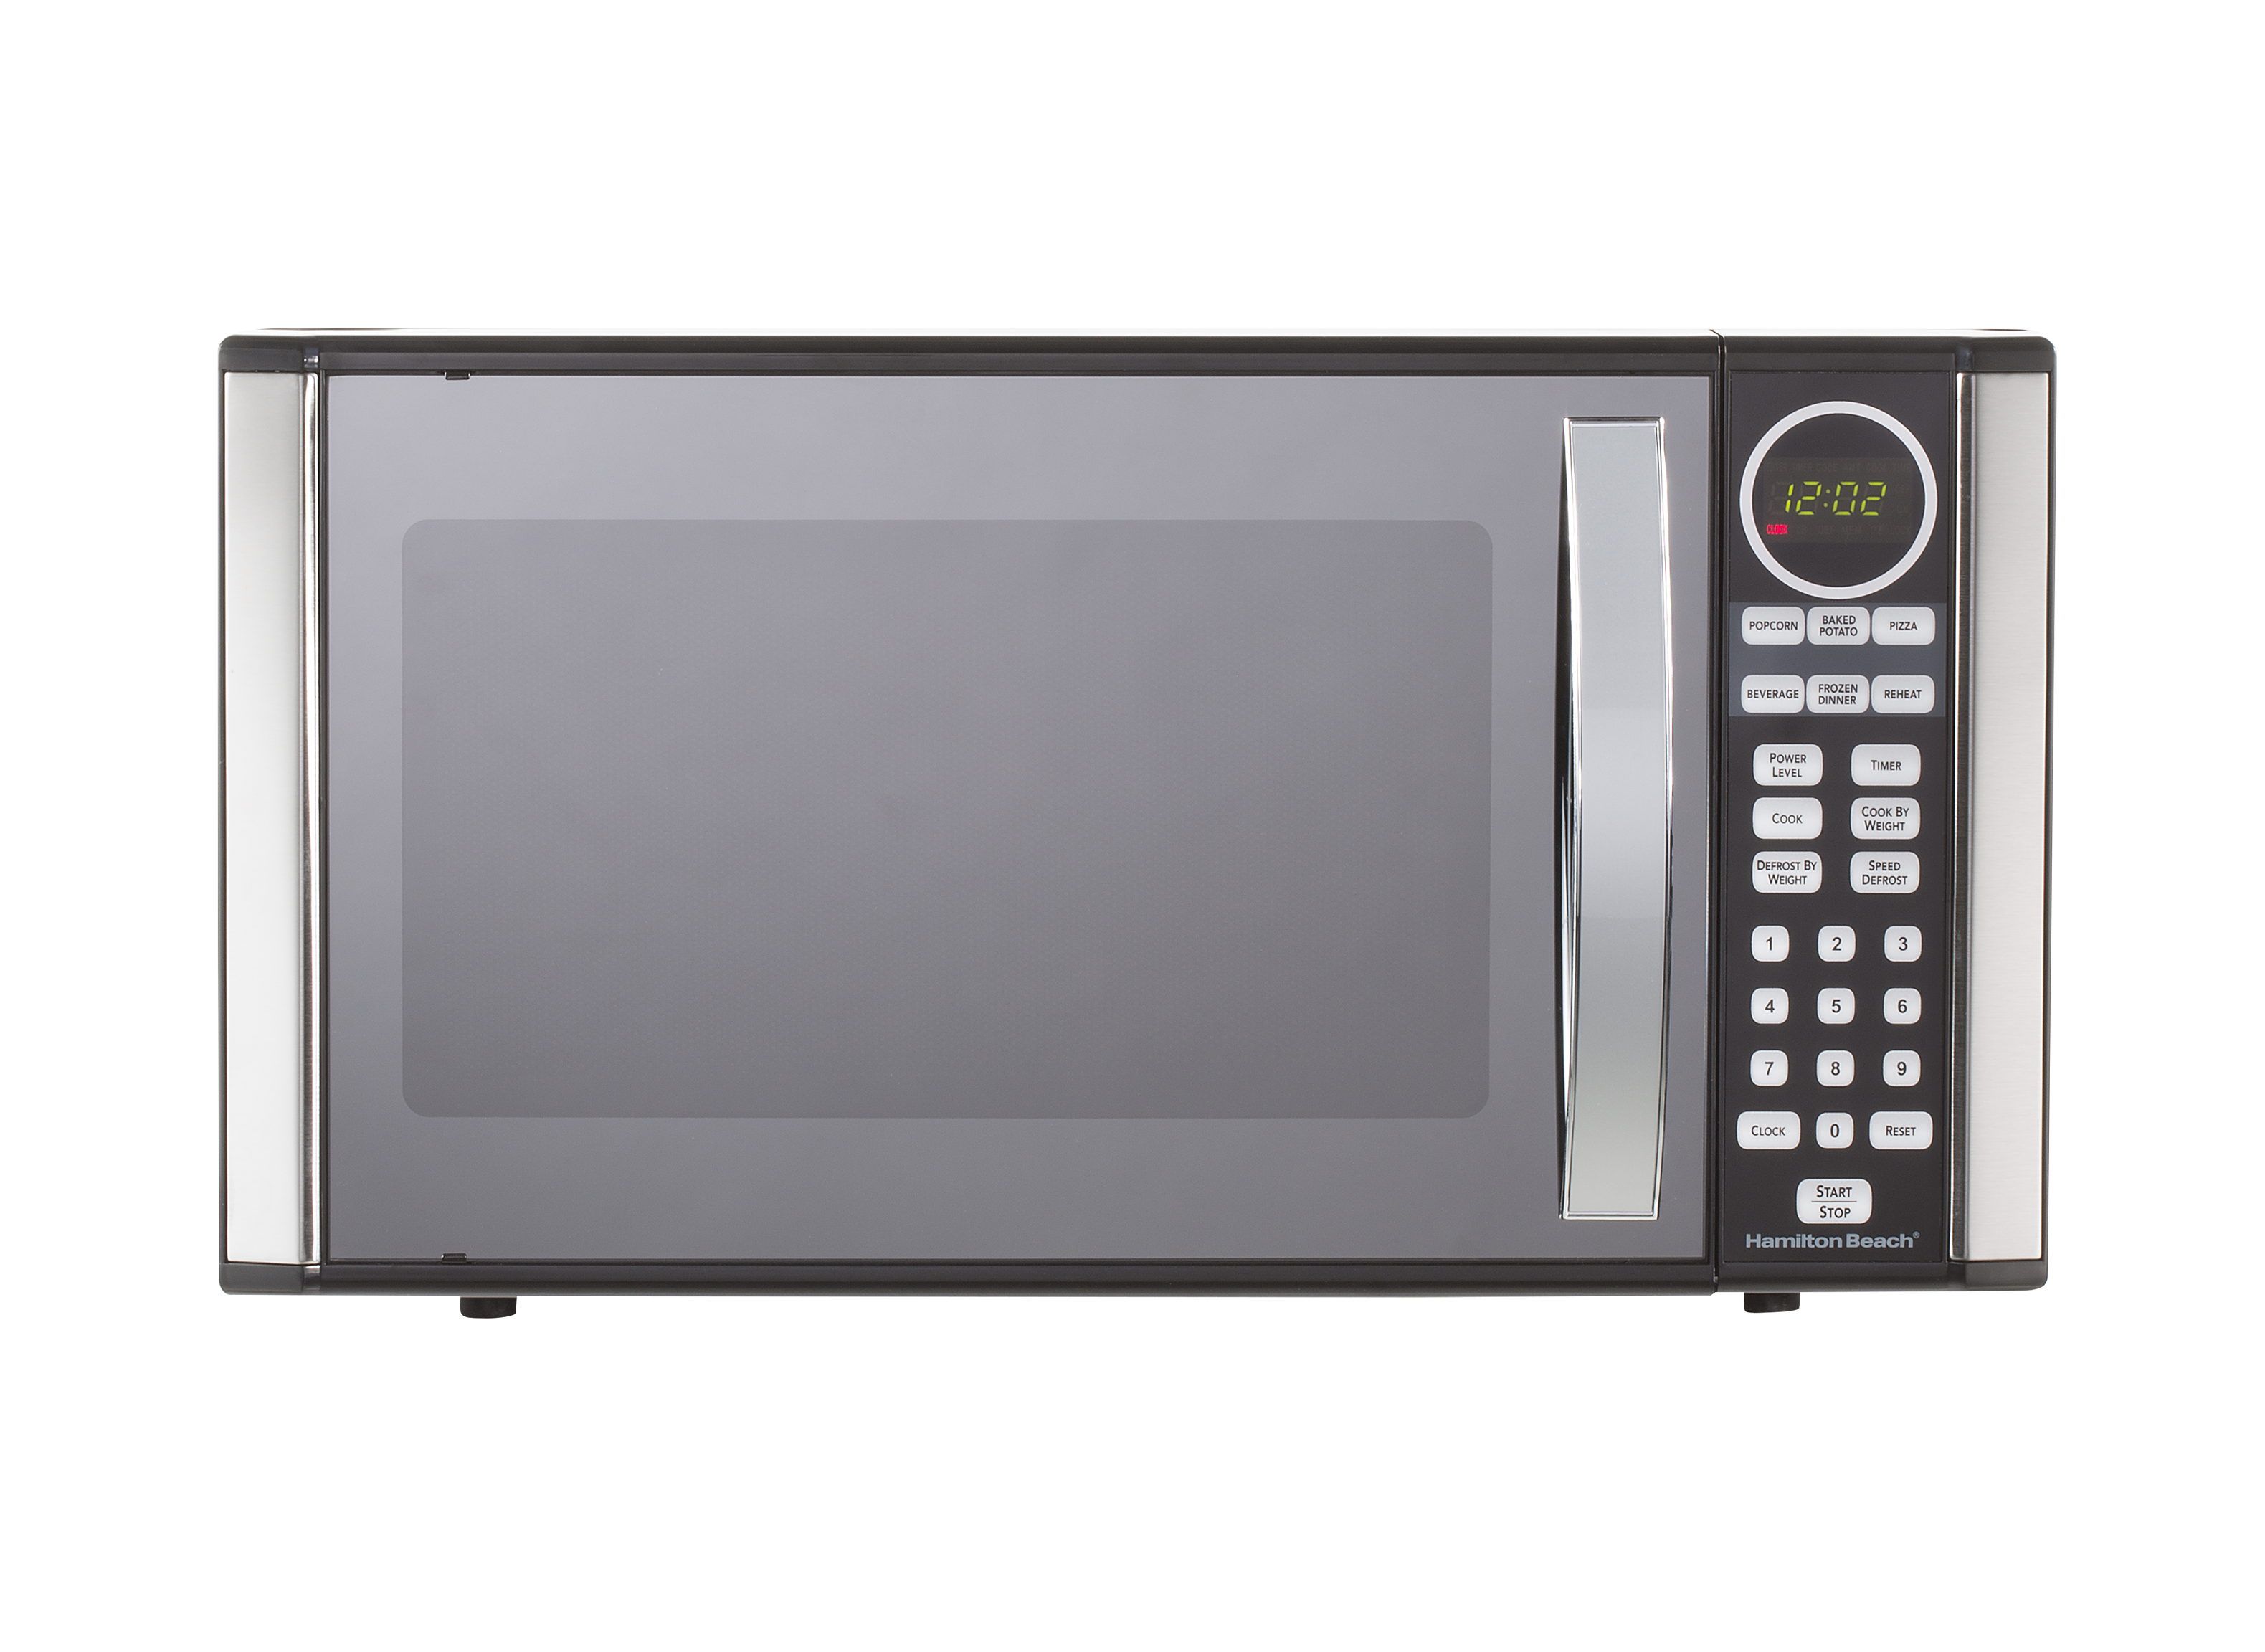 https://crdms.images.consumerreports.org/prod/products/cr/models/386827-countertopmicrowaveovens-hamiltonbeach-p10034alt4a.png